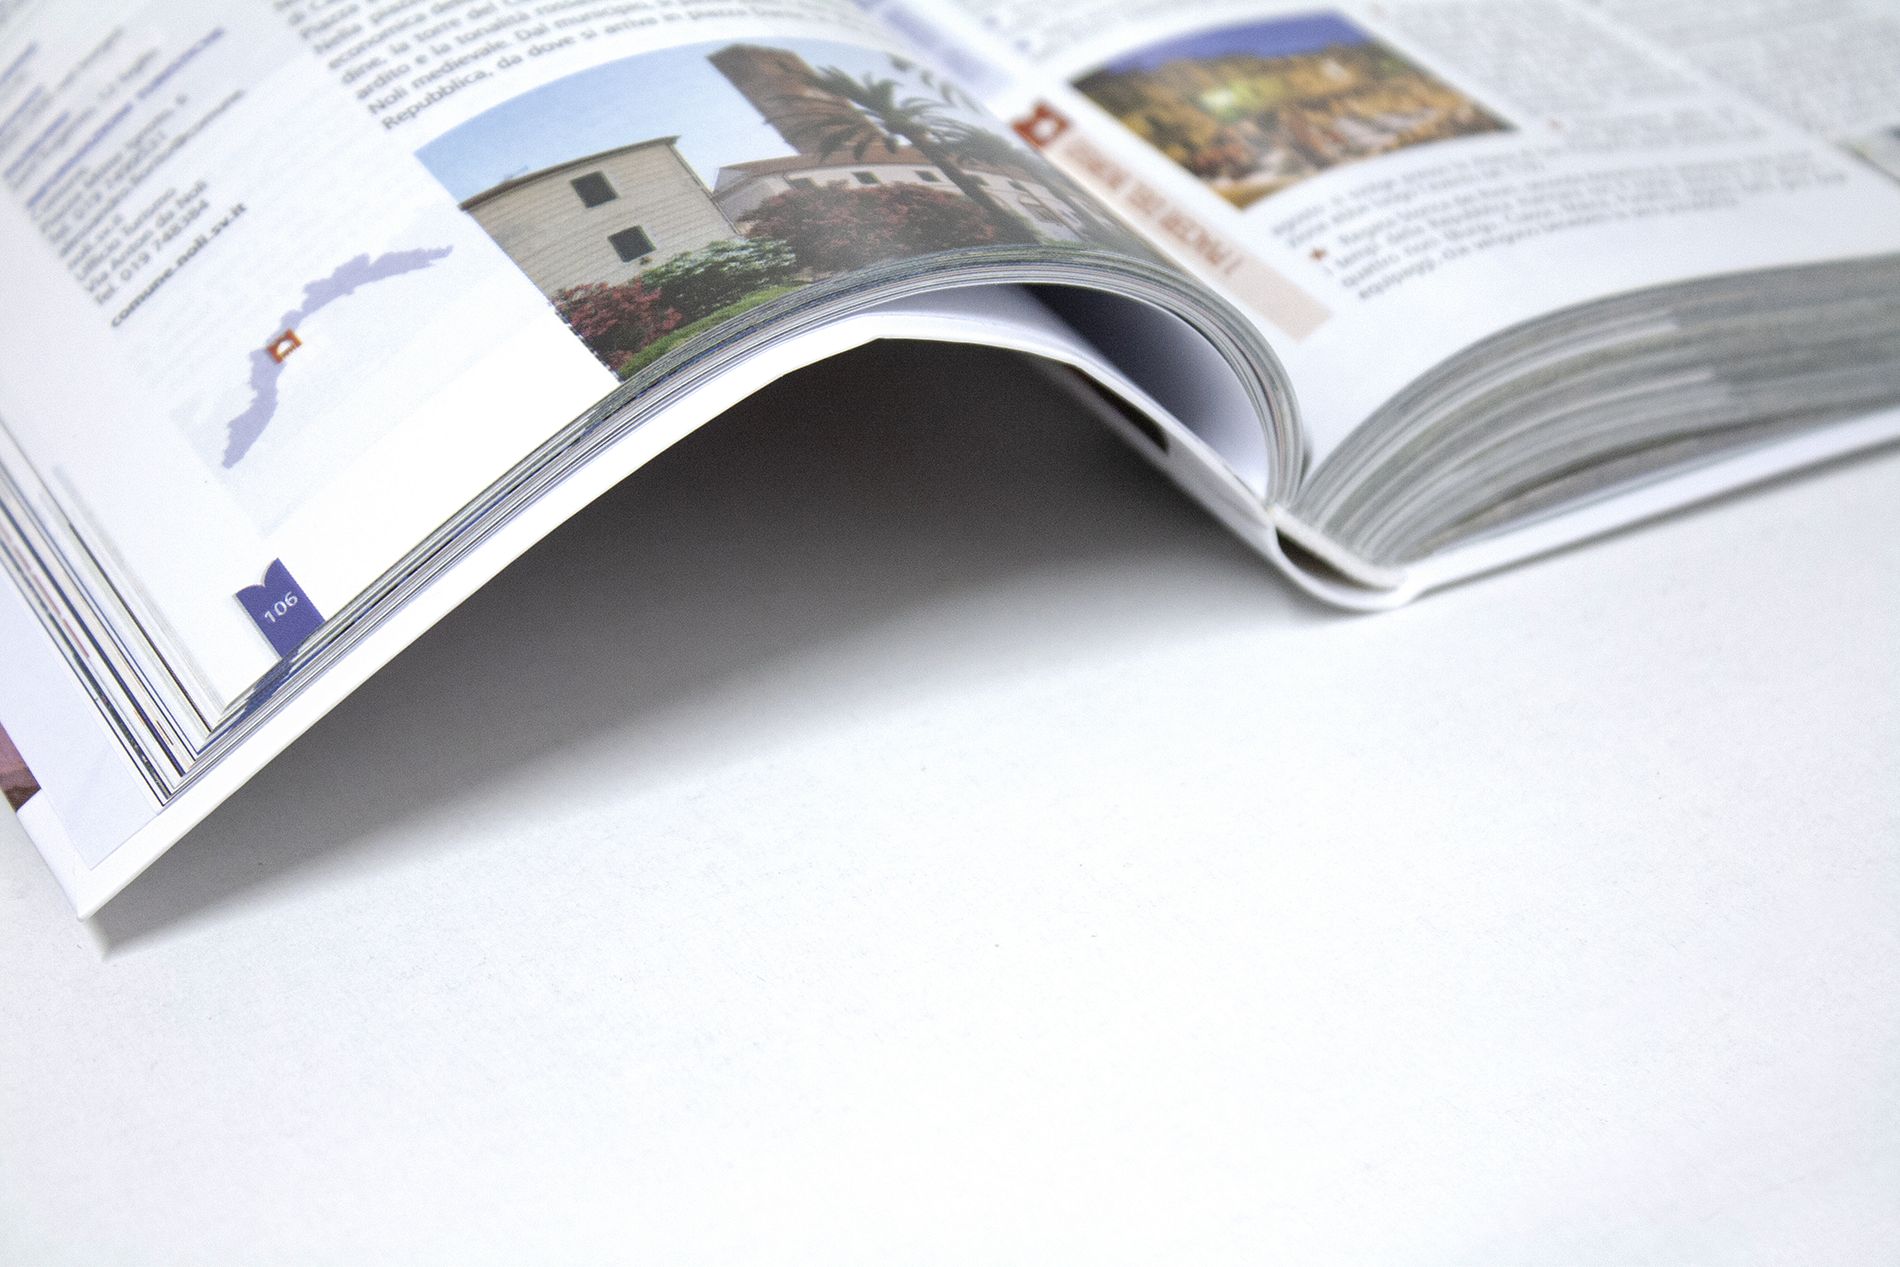 Print hardcover books with flexible cover